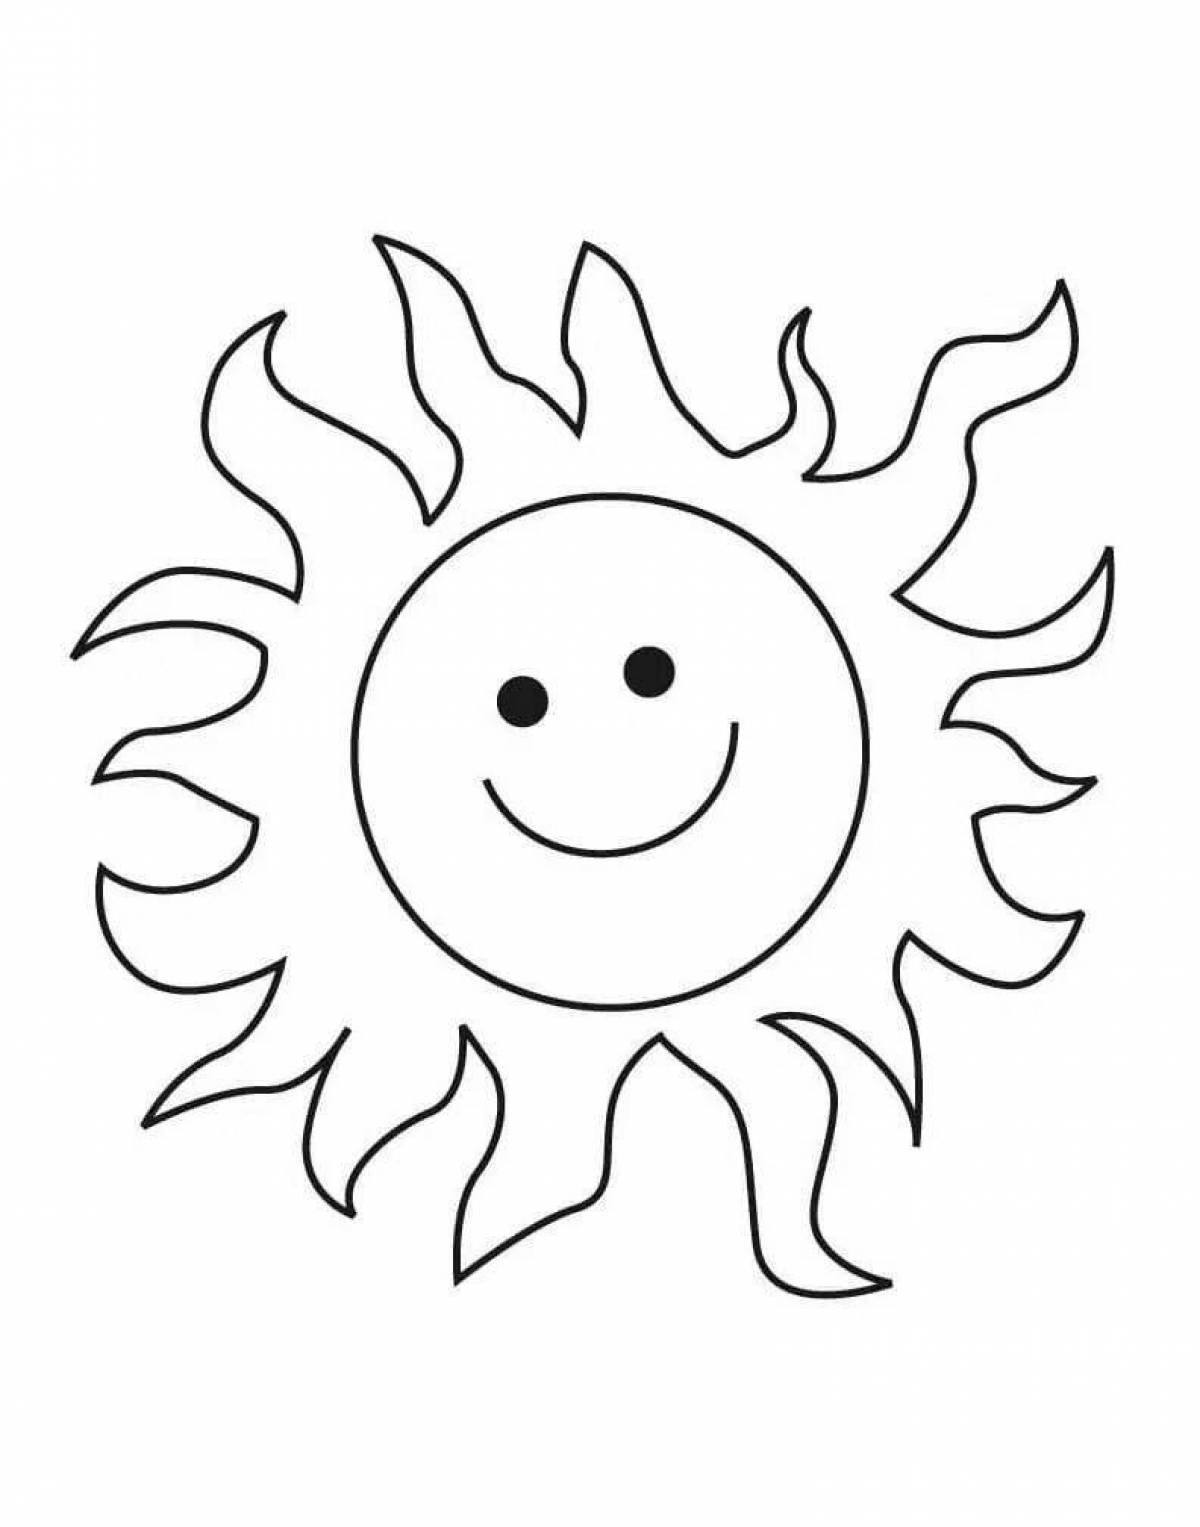 Incredible sun coloring book for 4-5 year olds